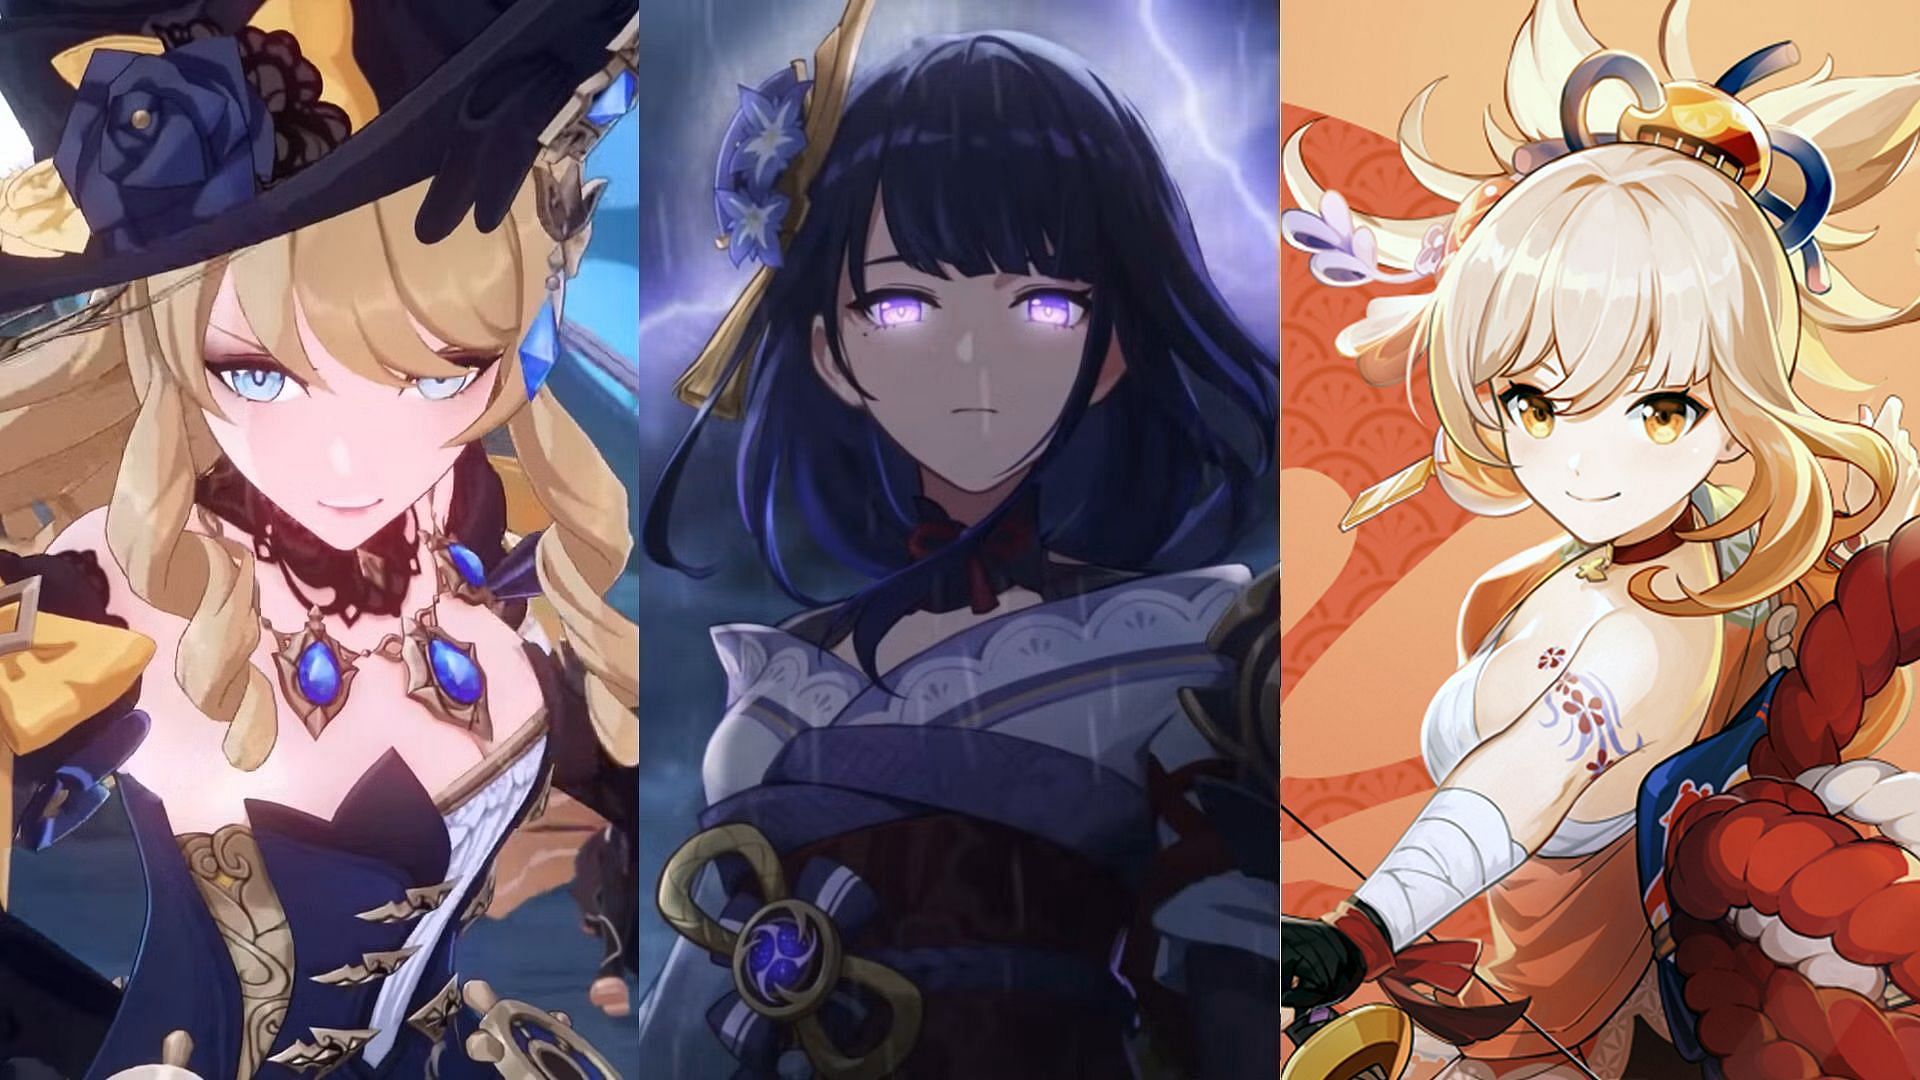 Predictions for 4-star characters in future banners have changed